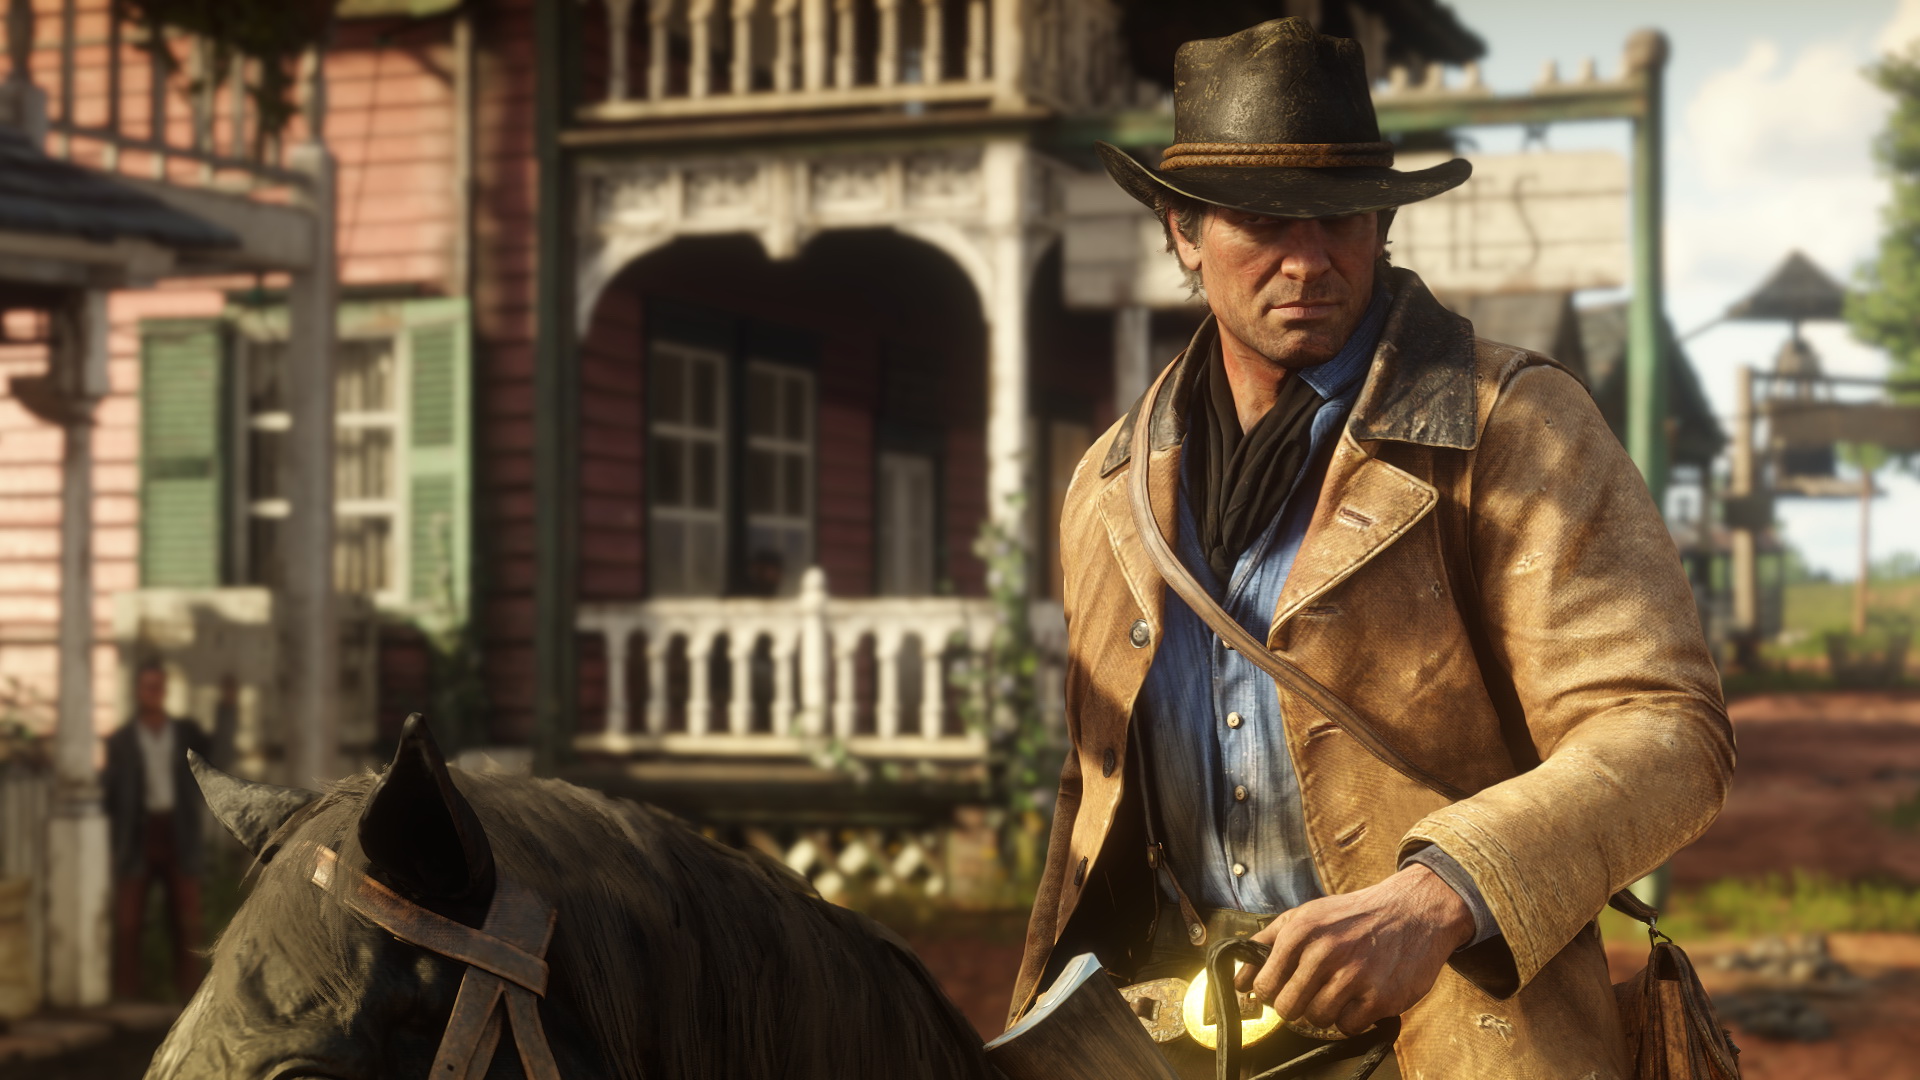 Red Redemption 2: to Acquire Trinkets and Talismans